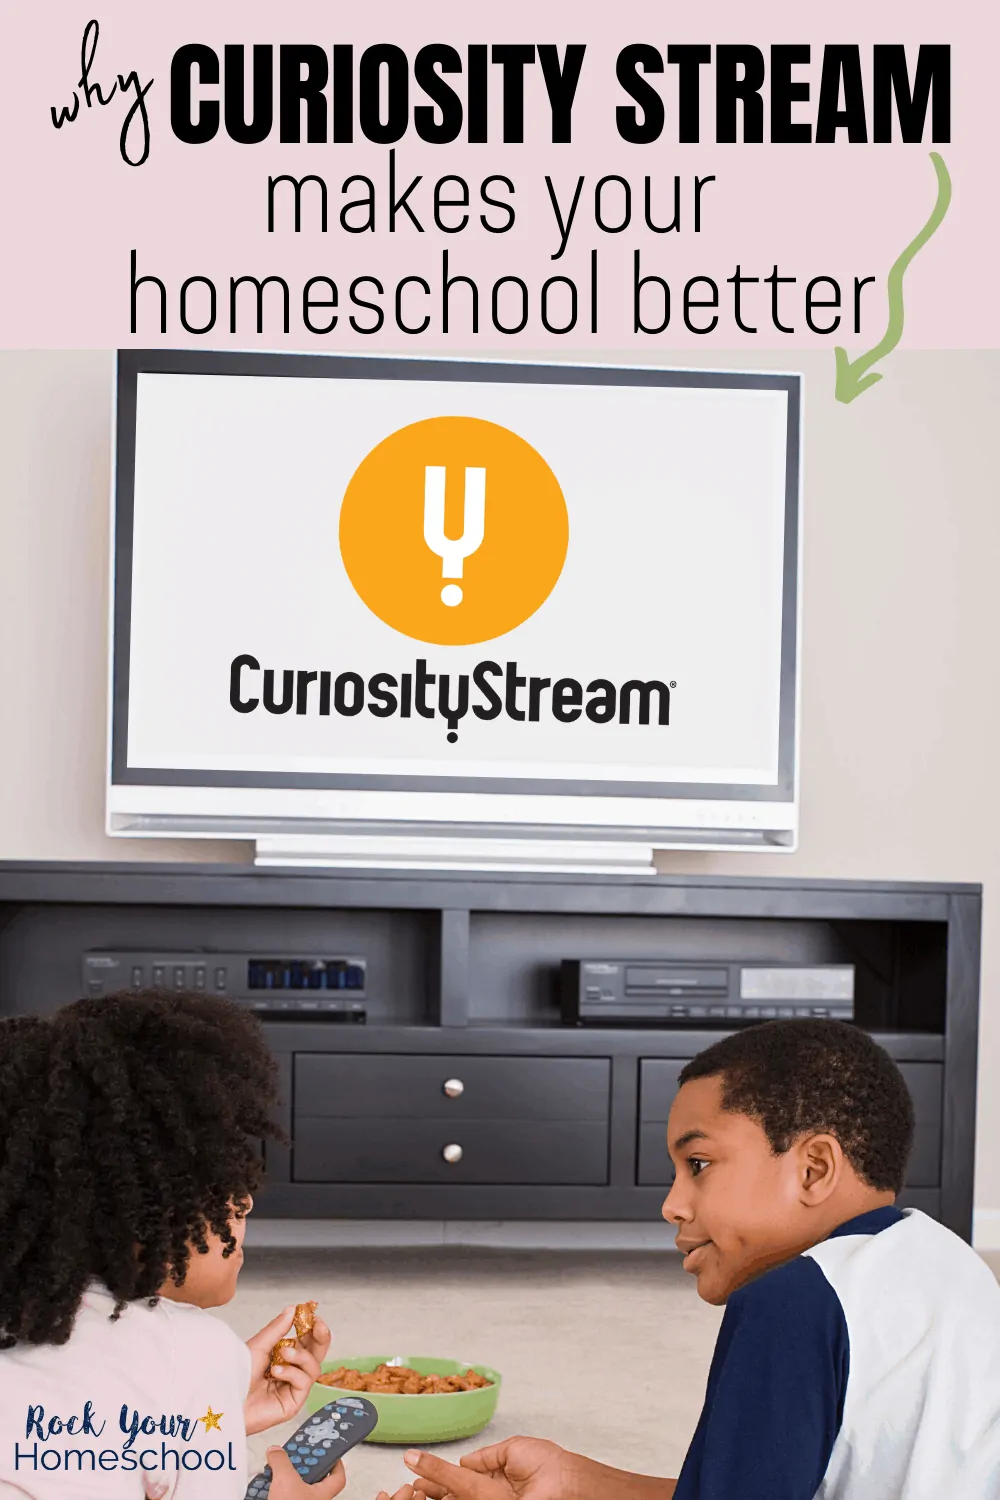 Why Curiosity Stream Makes Your Homeschool Better